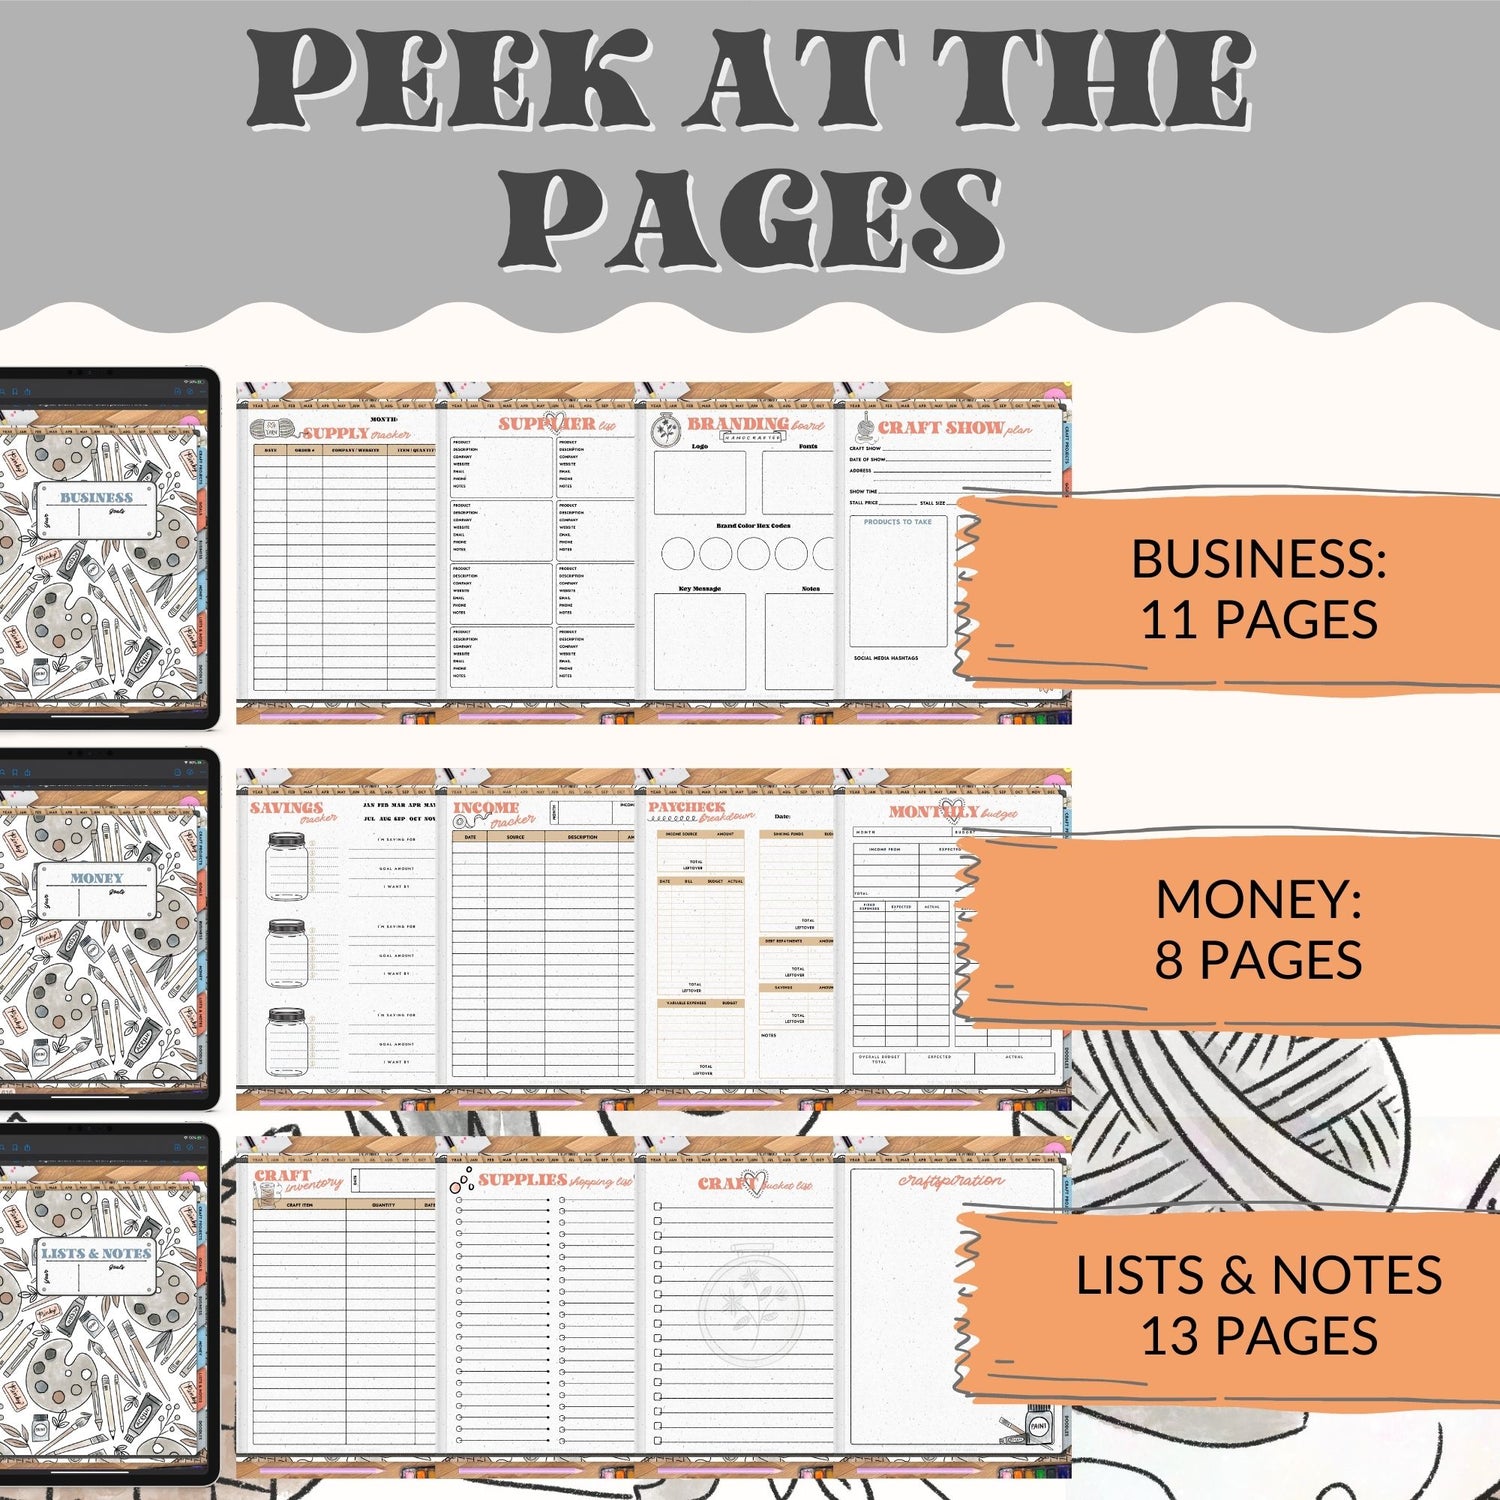 Plan out all of your craft projects quickly and efficiently with this 615-page Digital Craft Planner.  A digital craft planner helps in planning and organizing craft projects. The main purpose of a craft planner is to make sure that all the necessary steps and materials are identified in advance so that the project can be completed successfully and efficiently. 